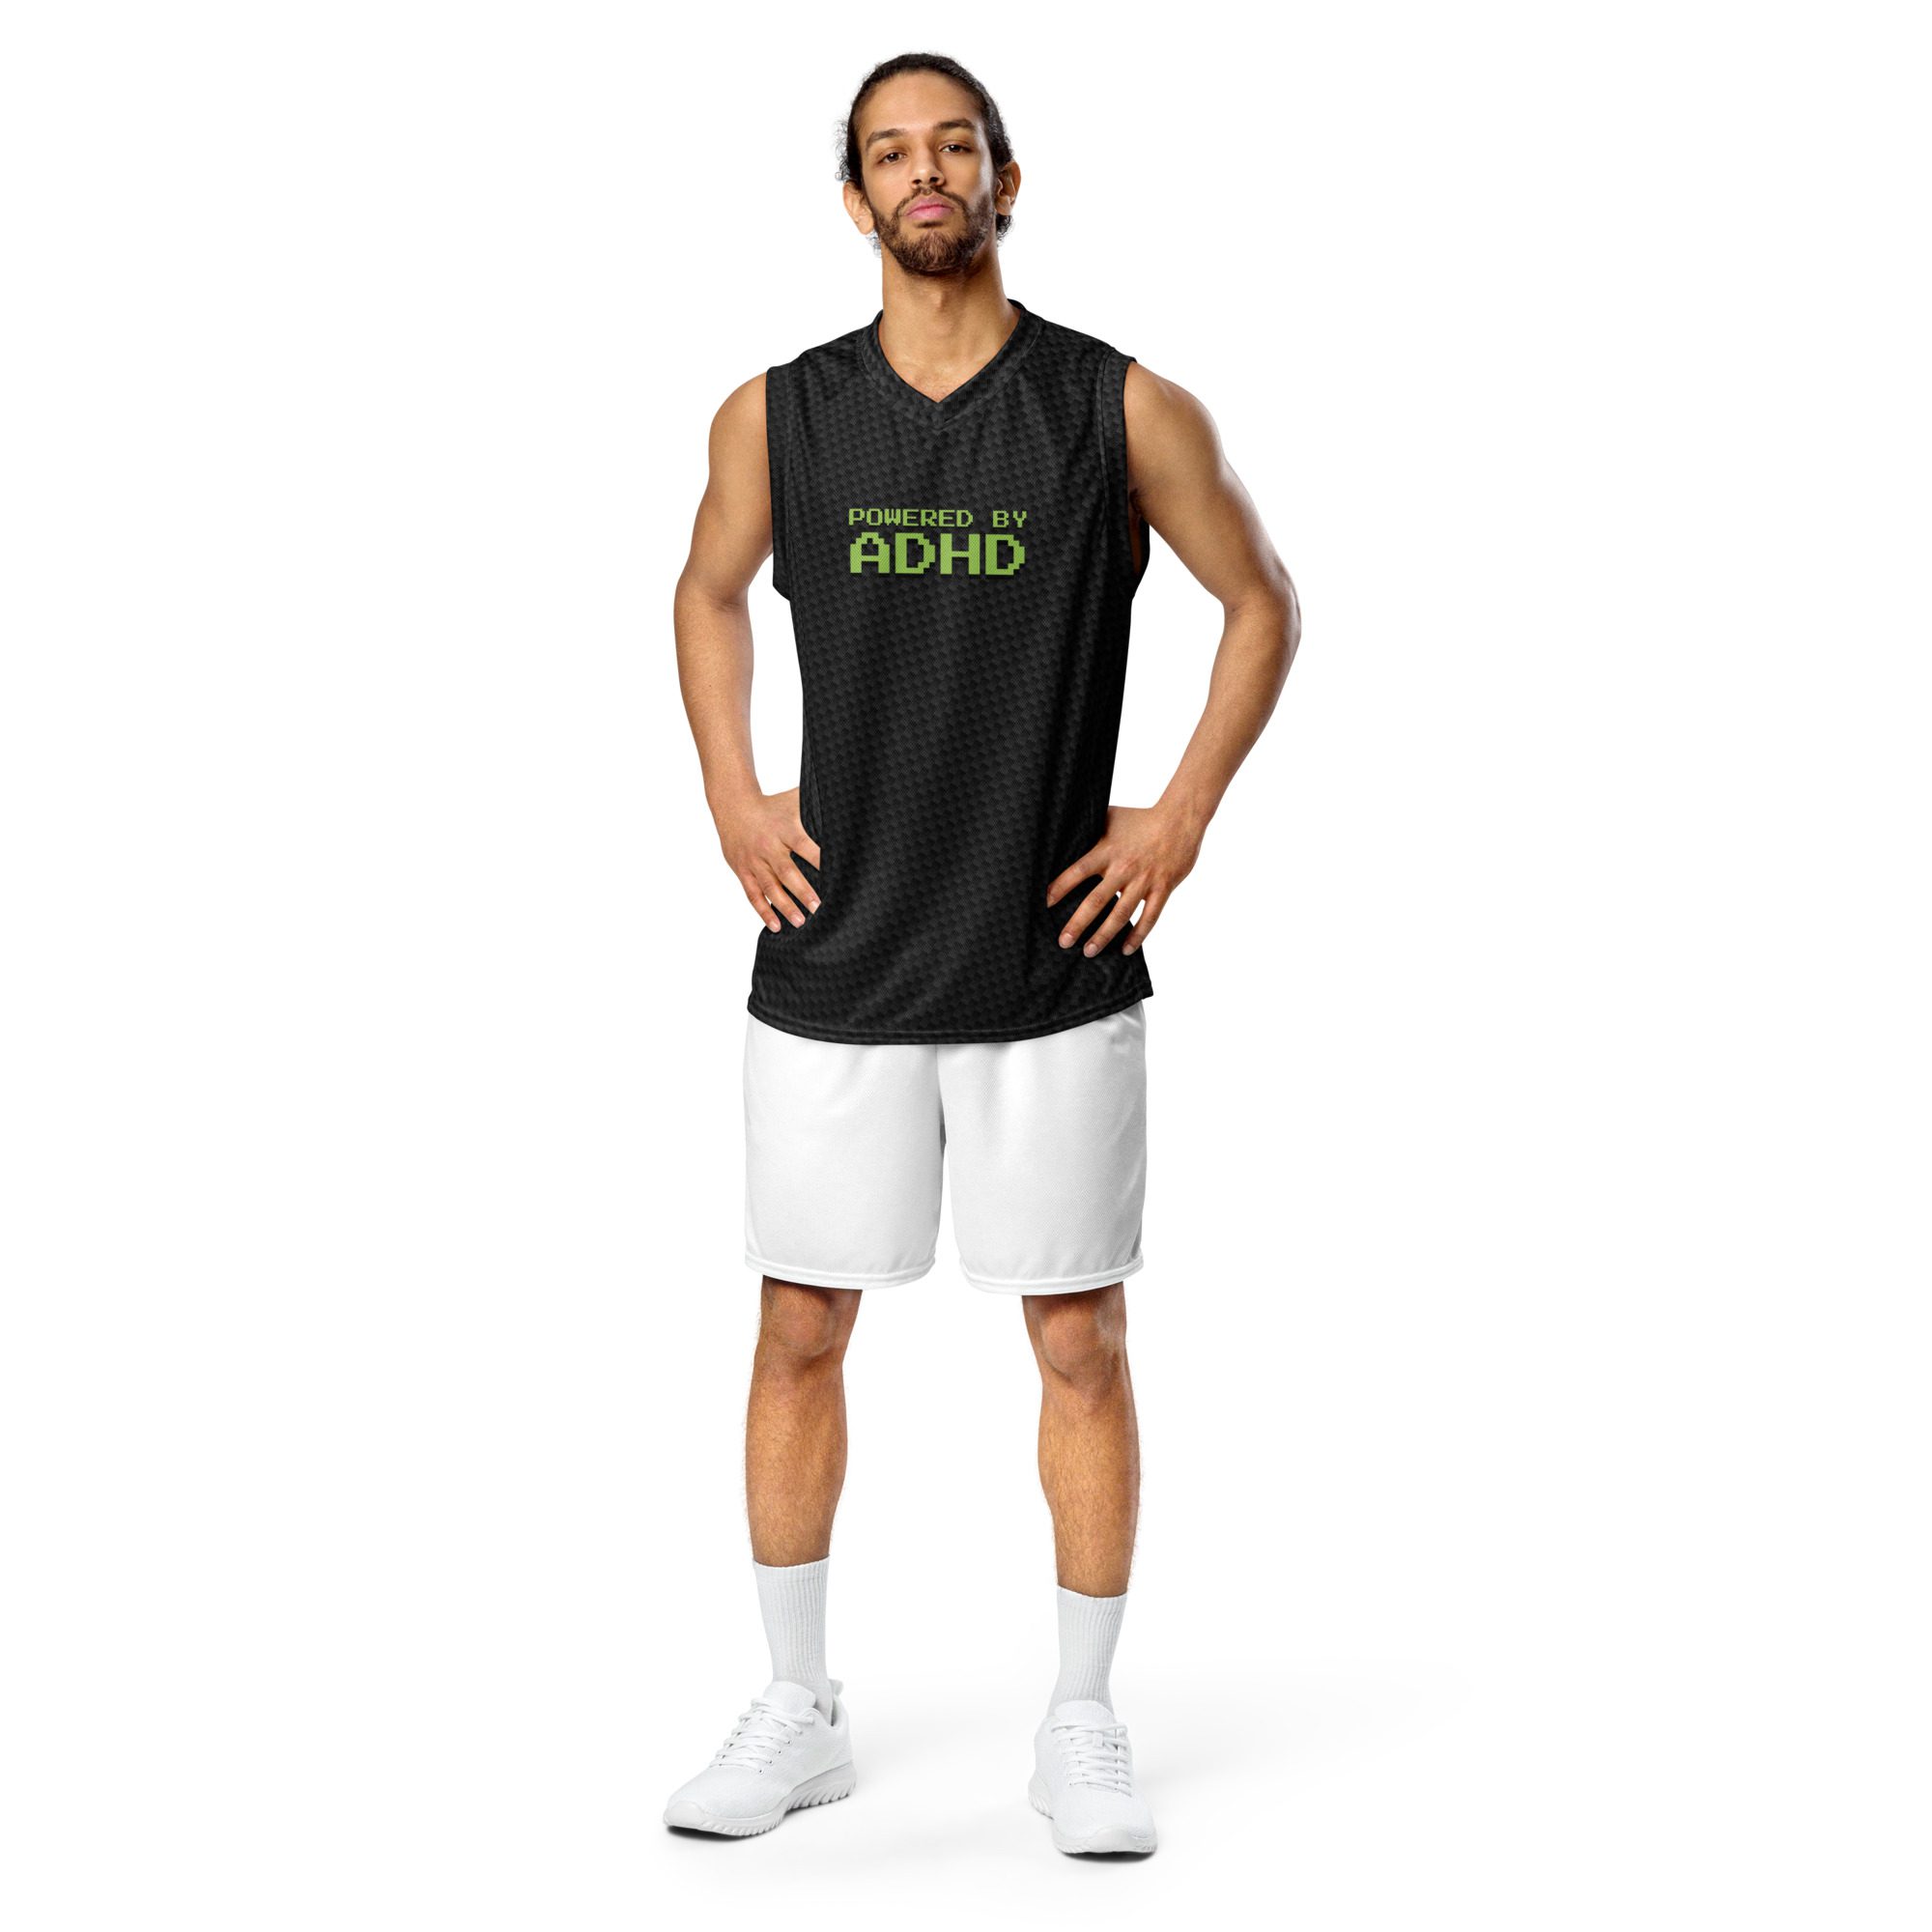 Powered By ADHD Recycled Unisex Basketball Jersey